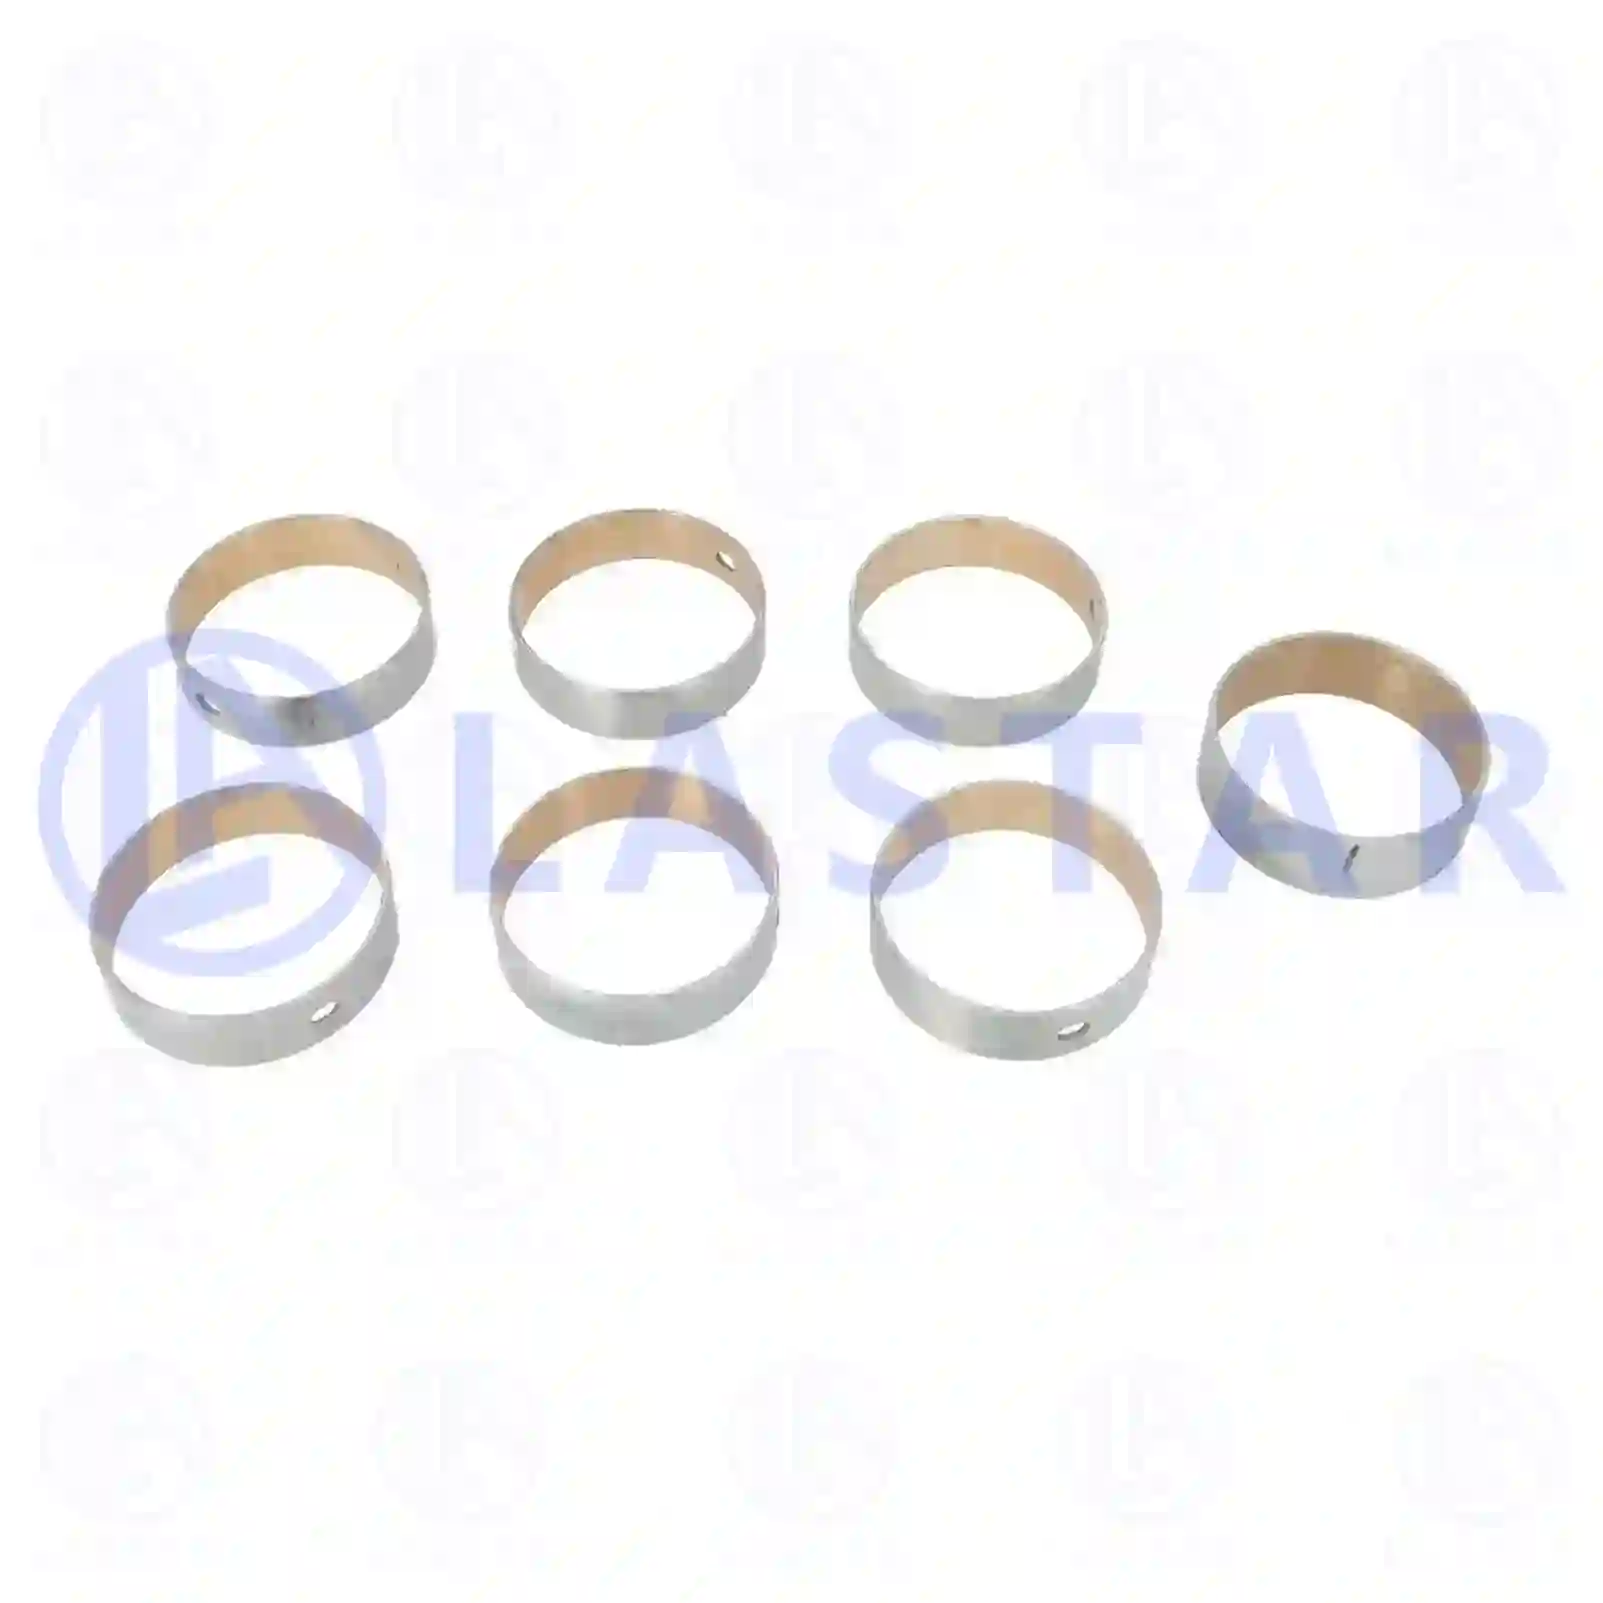 Camshaft bearing kit, 77704004, 7420858674, 20858 ||  77704004 Lastar Spare Part | Truck Spare Parts, Auotomotive Spare Parts Camshaft bearing kit, 77704004, 7420858674, 20858 ||  77704004 Lastar Spare Part | Truck Spare Parts, Auotomotive Spare Parts